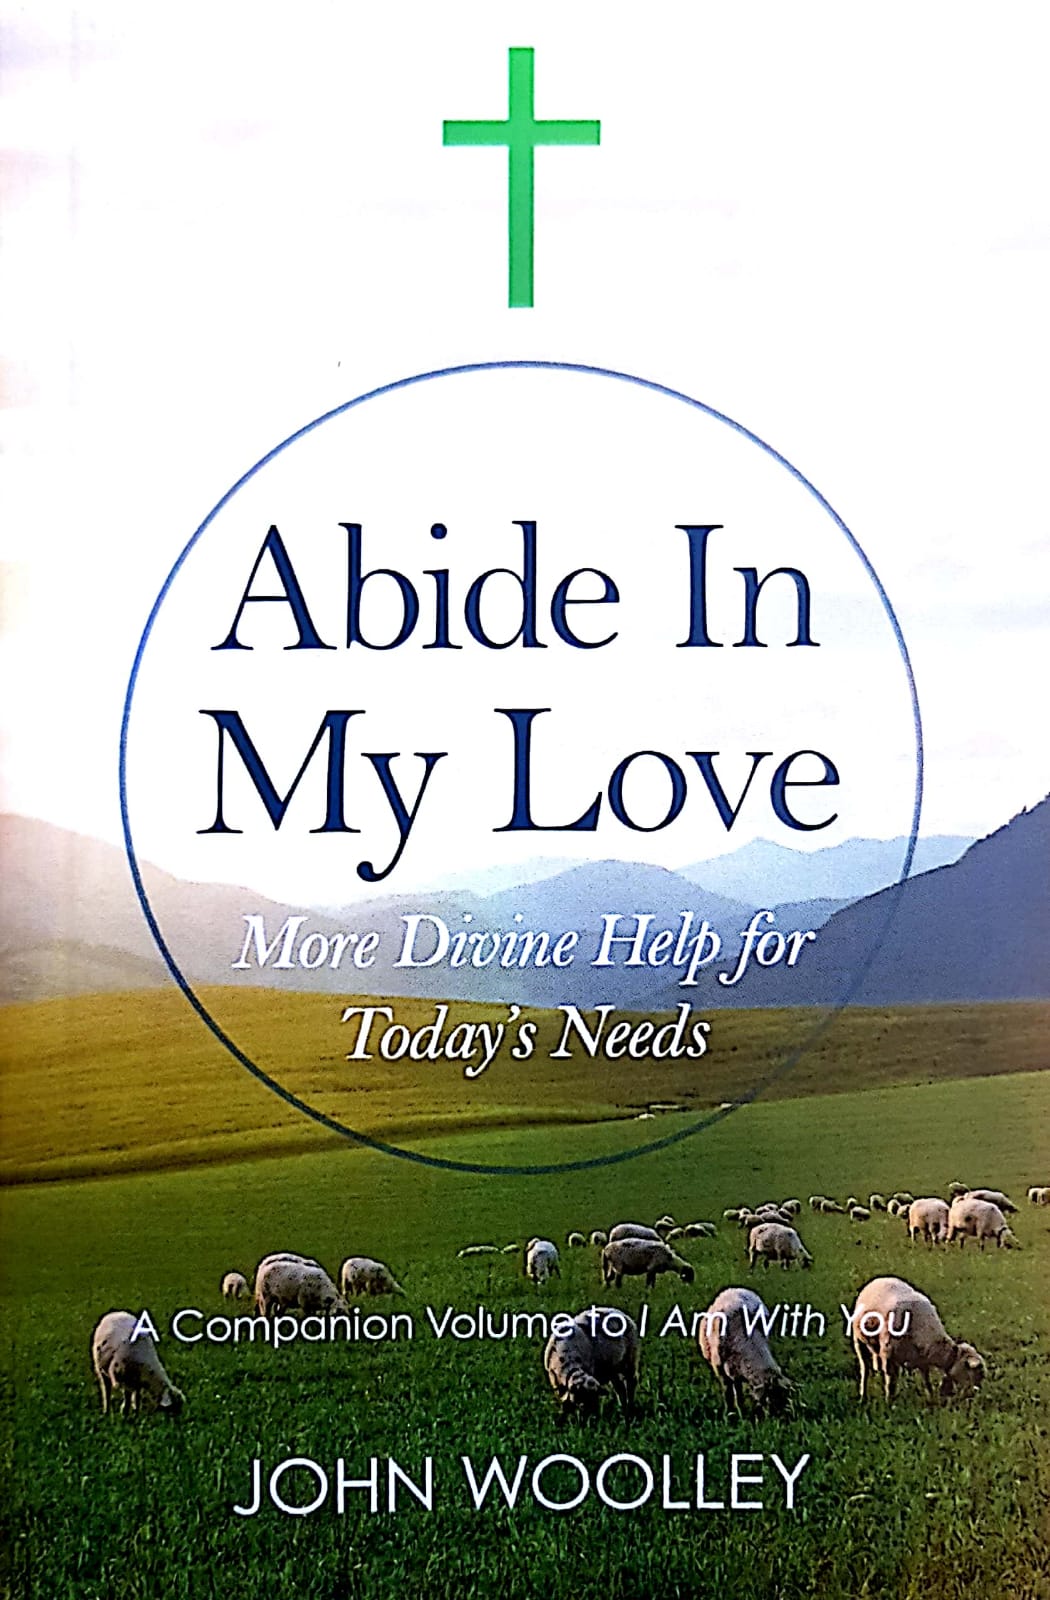 Abide In My Love - Full Paperback Edition